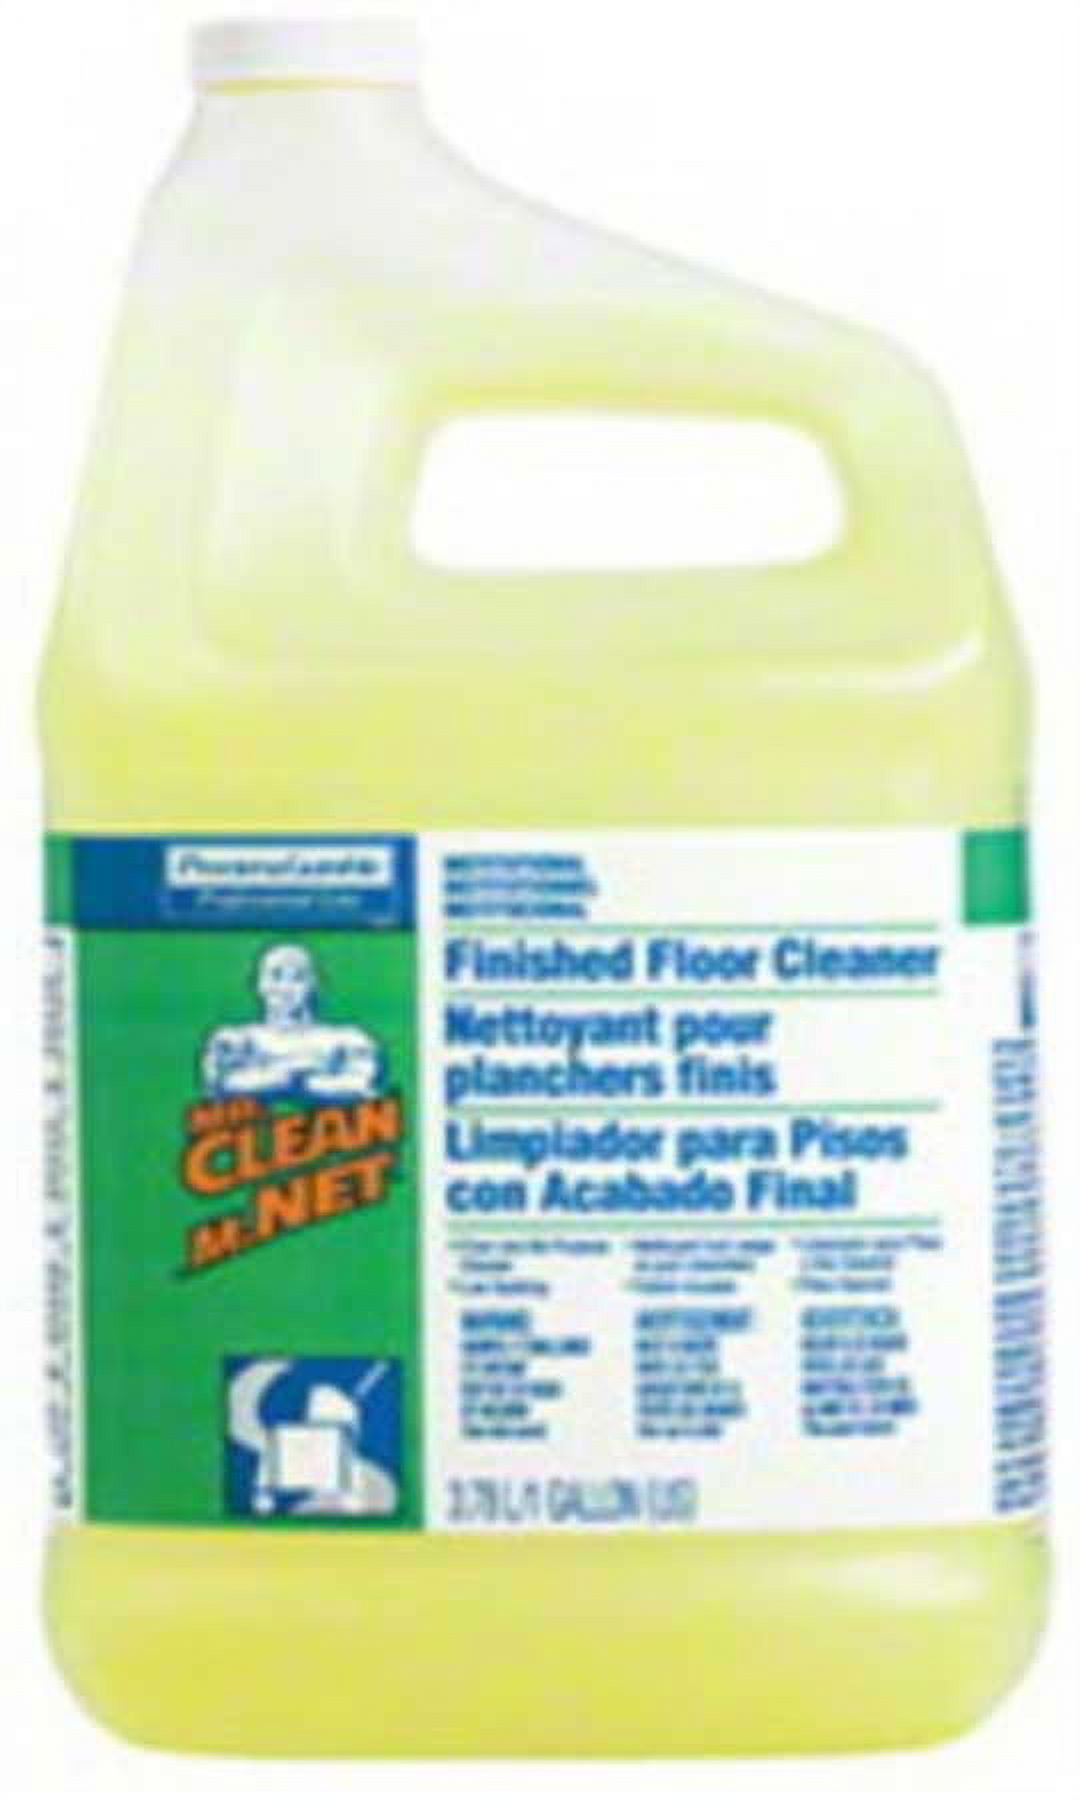 Mr. Clean 1 Gal. Lemon Scent Finished Floor Cleaner (Case of 3) PGC02621CT  - The Home Depot